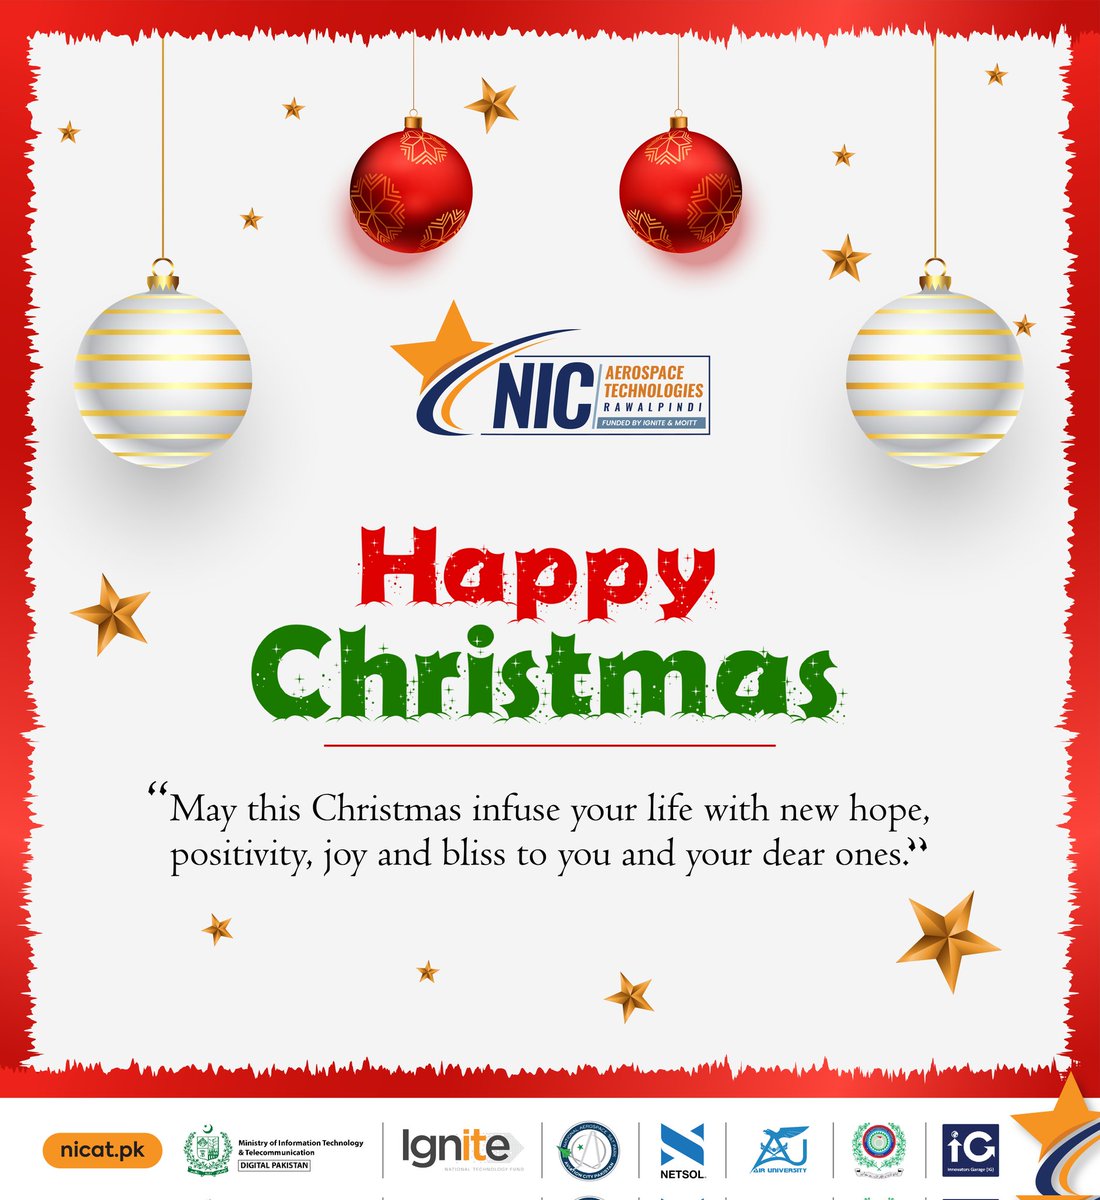 NICAT Team, wishing you a Christmas filled with love, peace, and happiness! 🎄✨
Happy Christmas to all those celebrating!✨🥳

#happychristmas #nicatcelebrates #ChristmasCheer